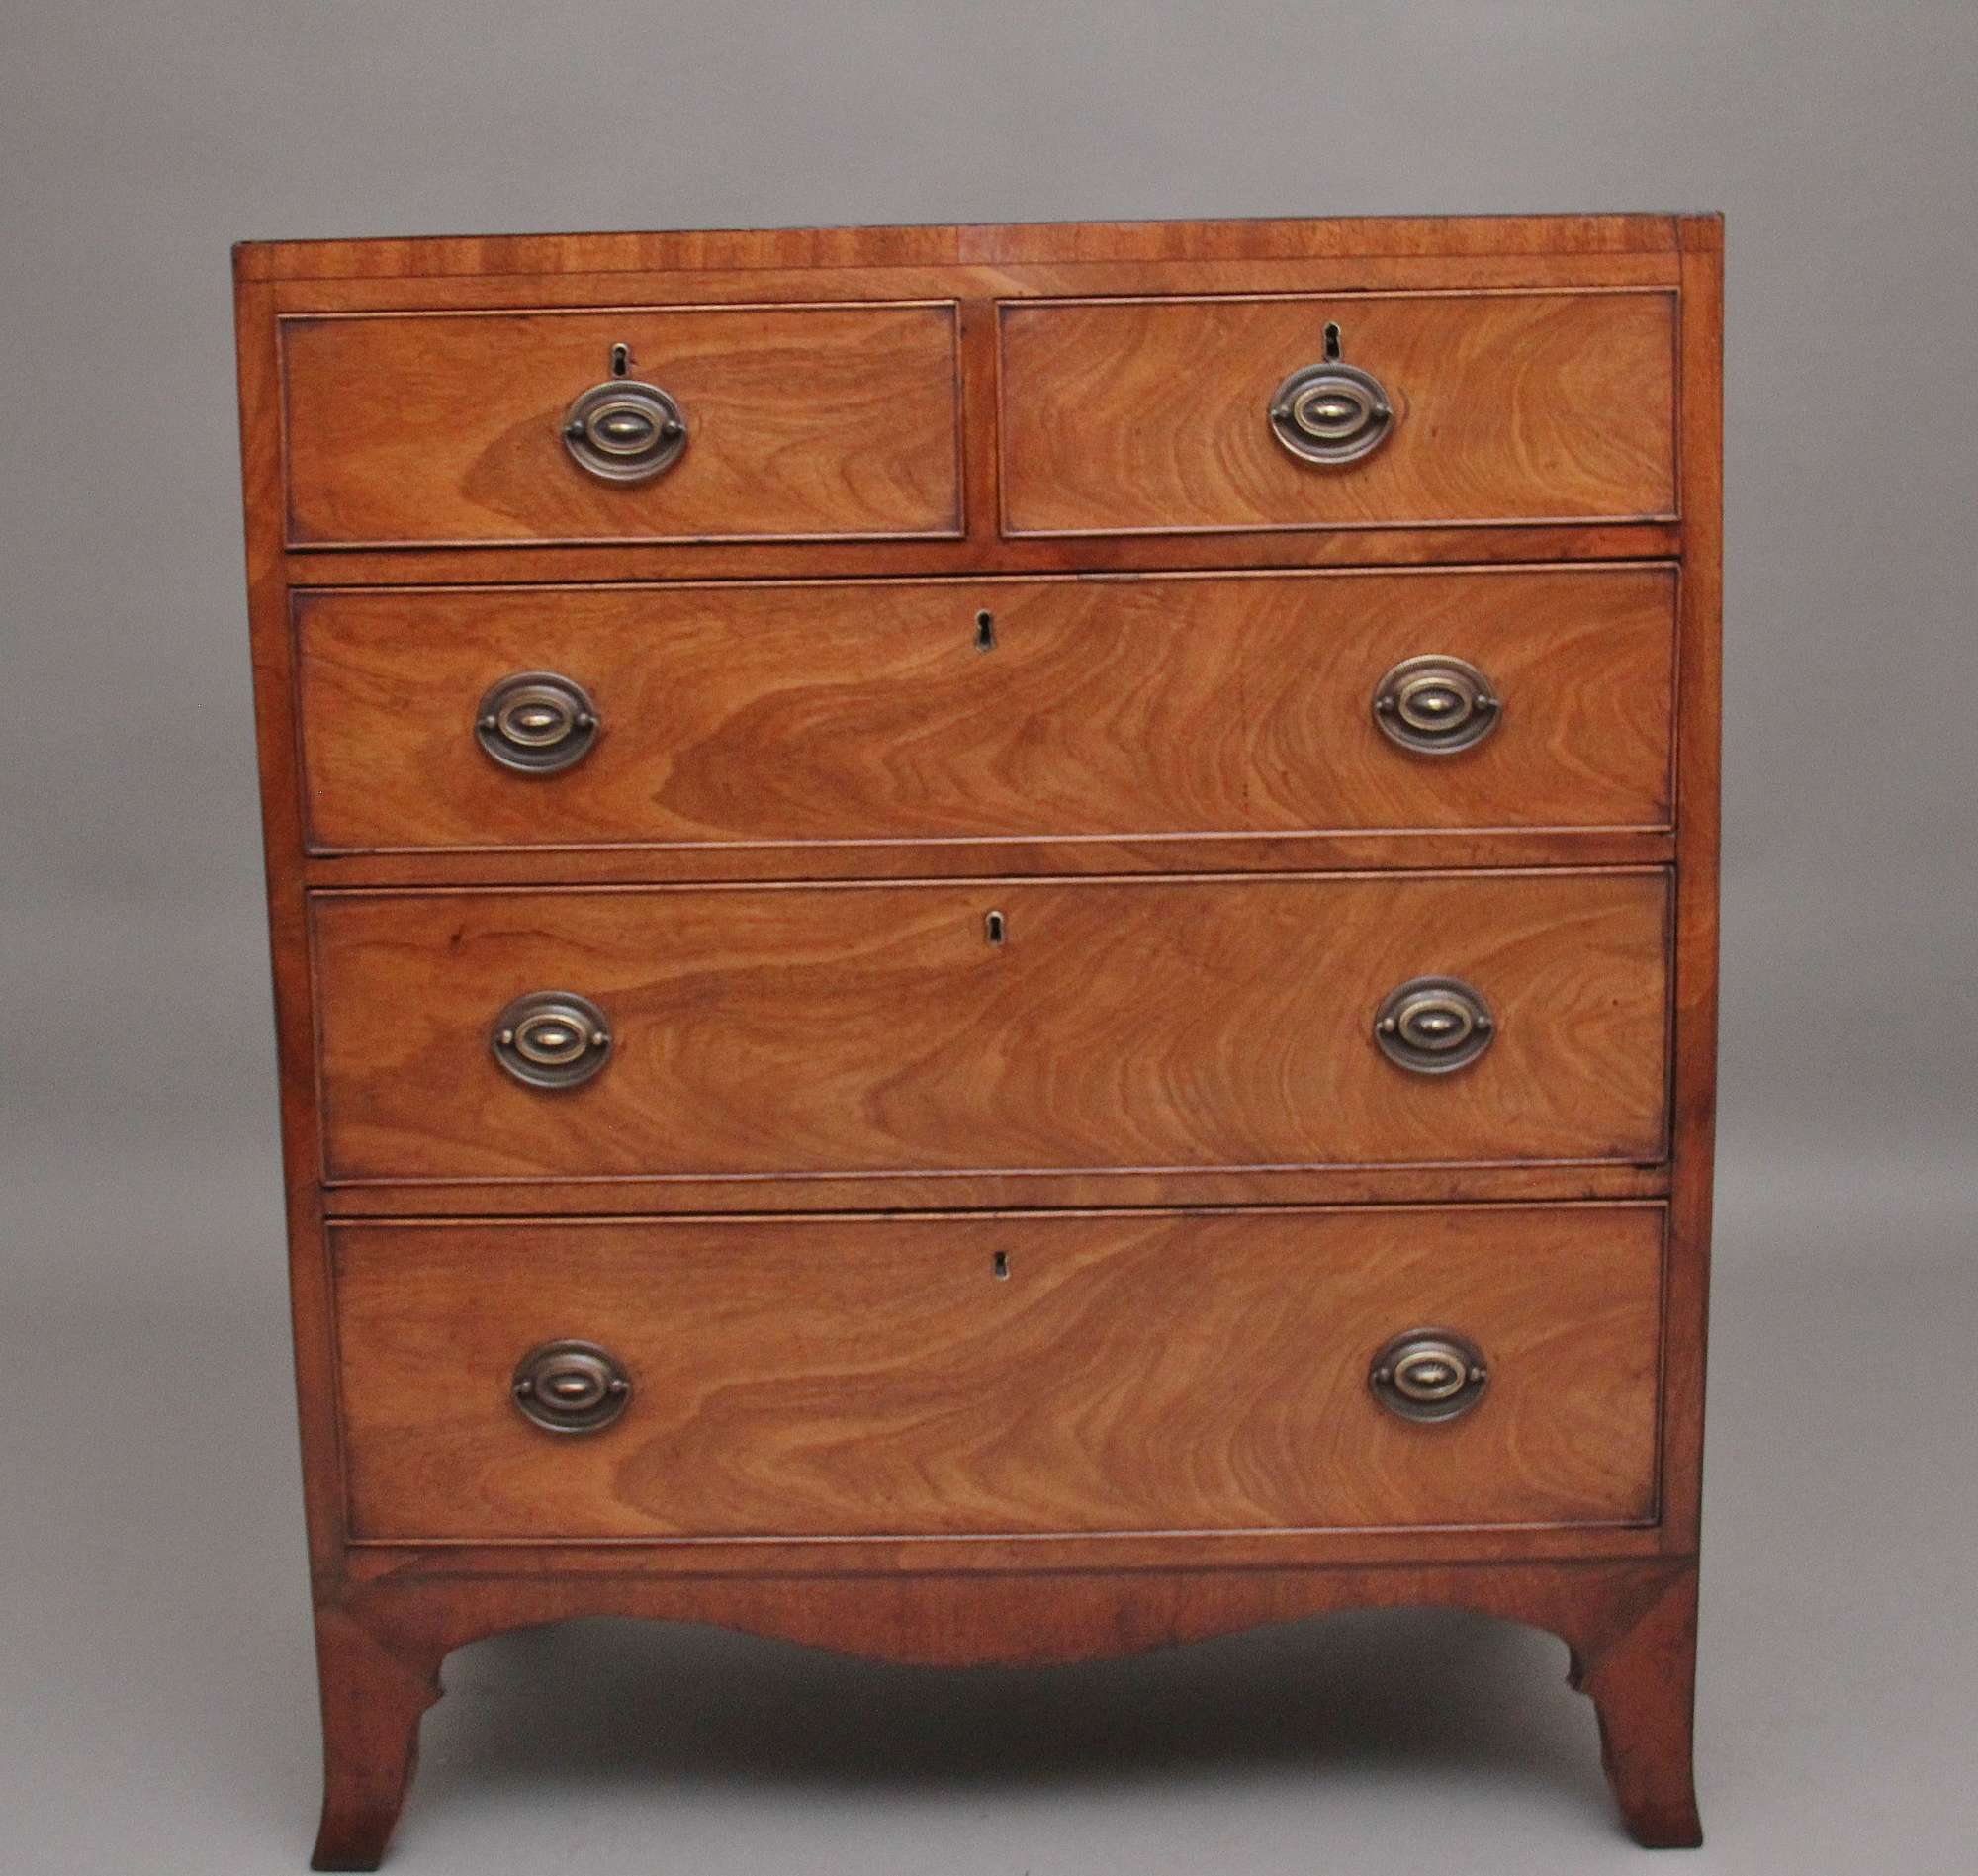 A lovely quality early 19th Century mahogany chest of drawers